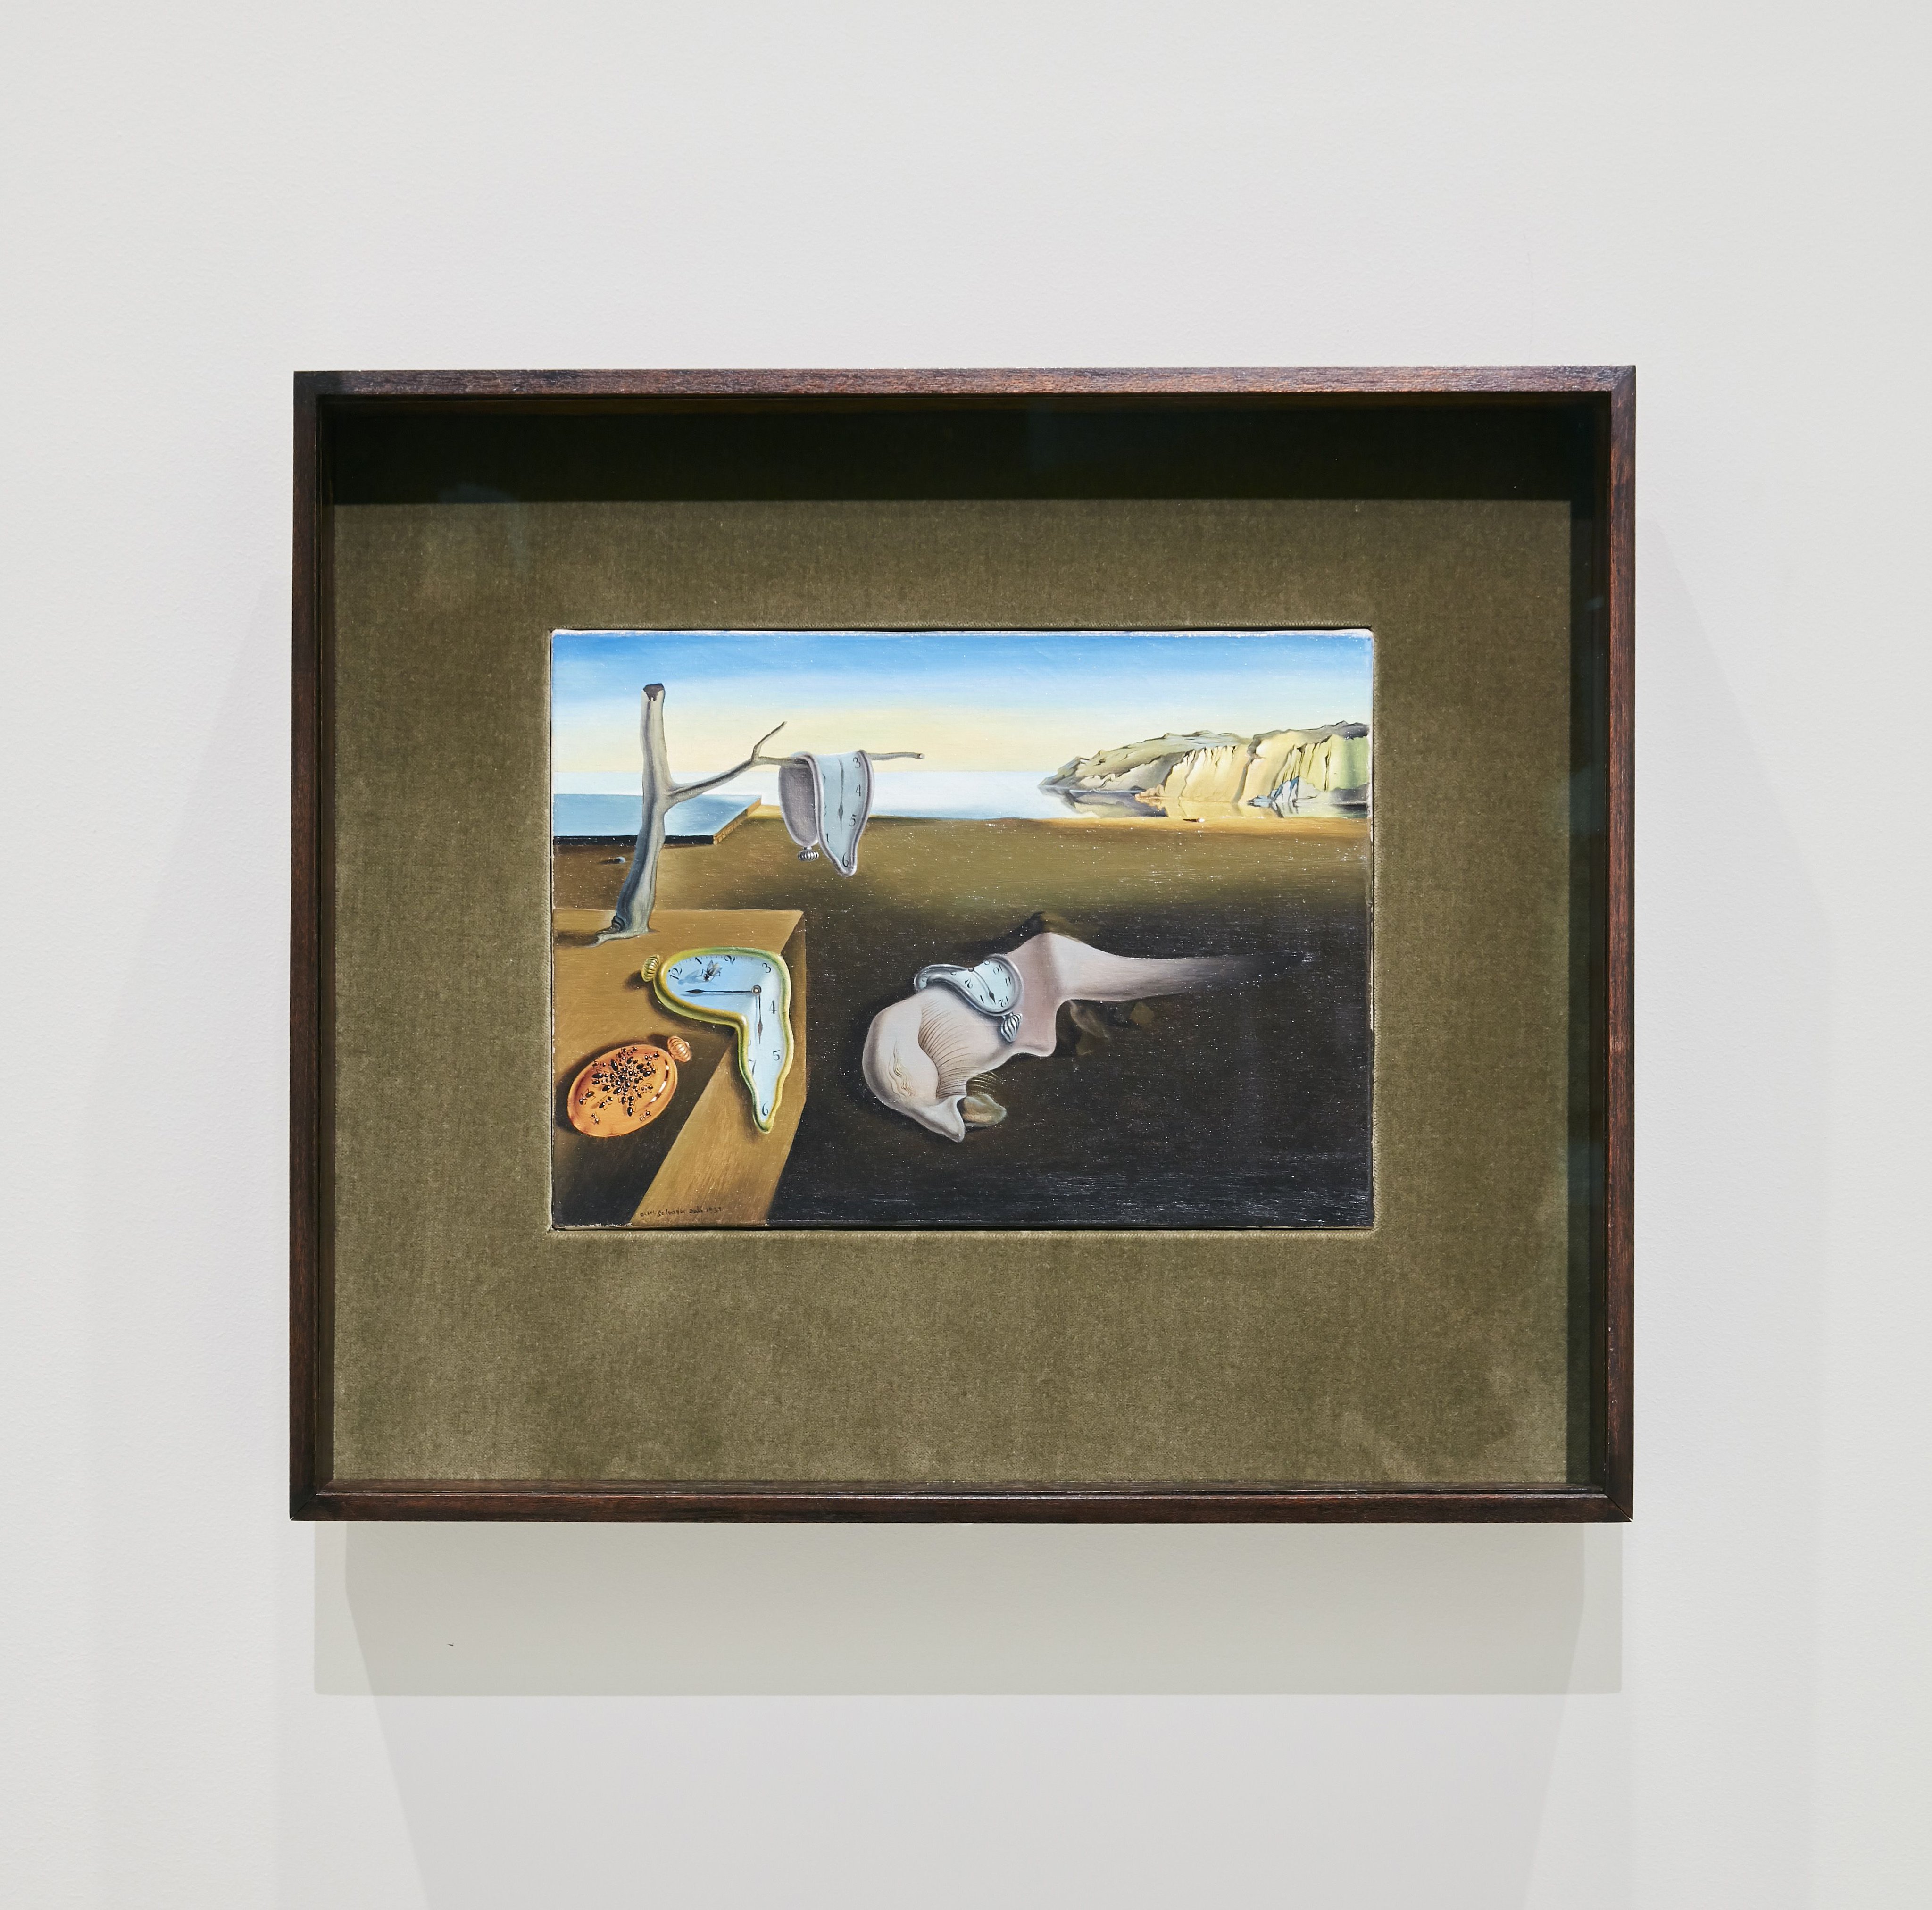 NGV on Twitter: "Salvador Dalí described his paintings as 'hand painted dream photographs'. Visit his world-renowned painting, “The persistence of memory”, 1931, on display in MoMA at NGV: https://t.co/zw9w1TvuC3 / Twitter